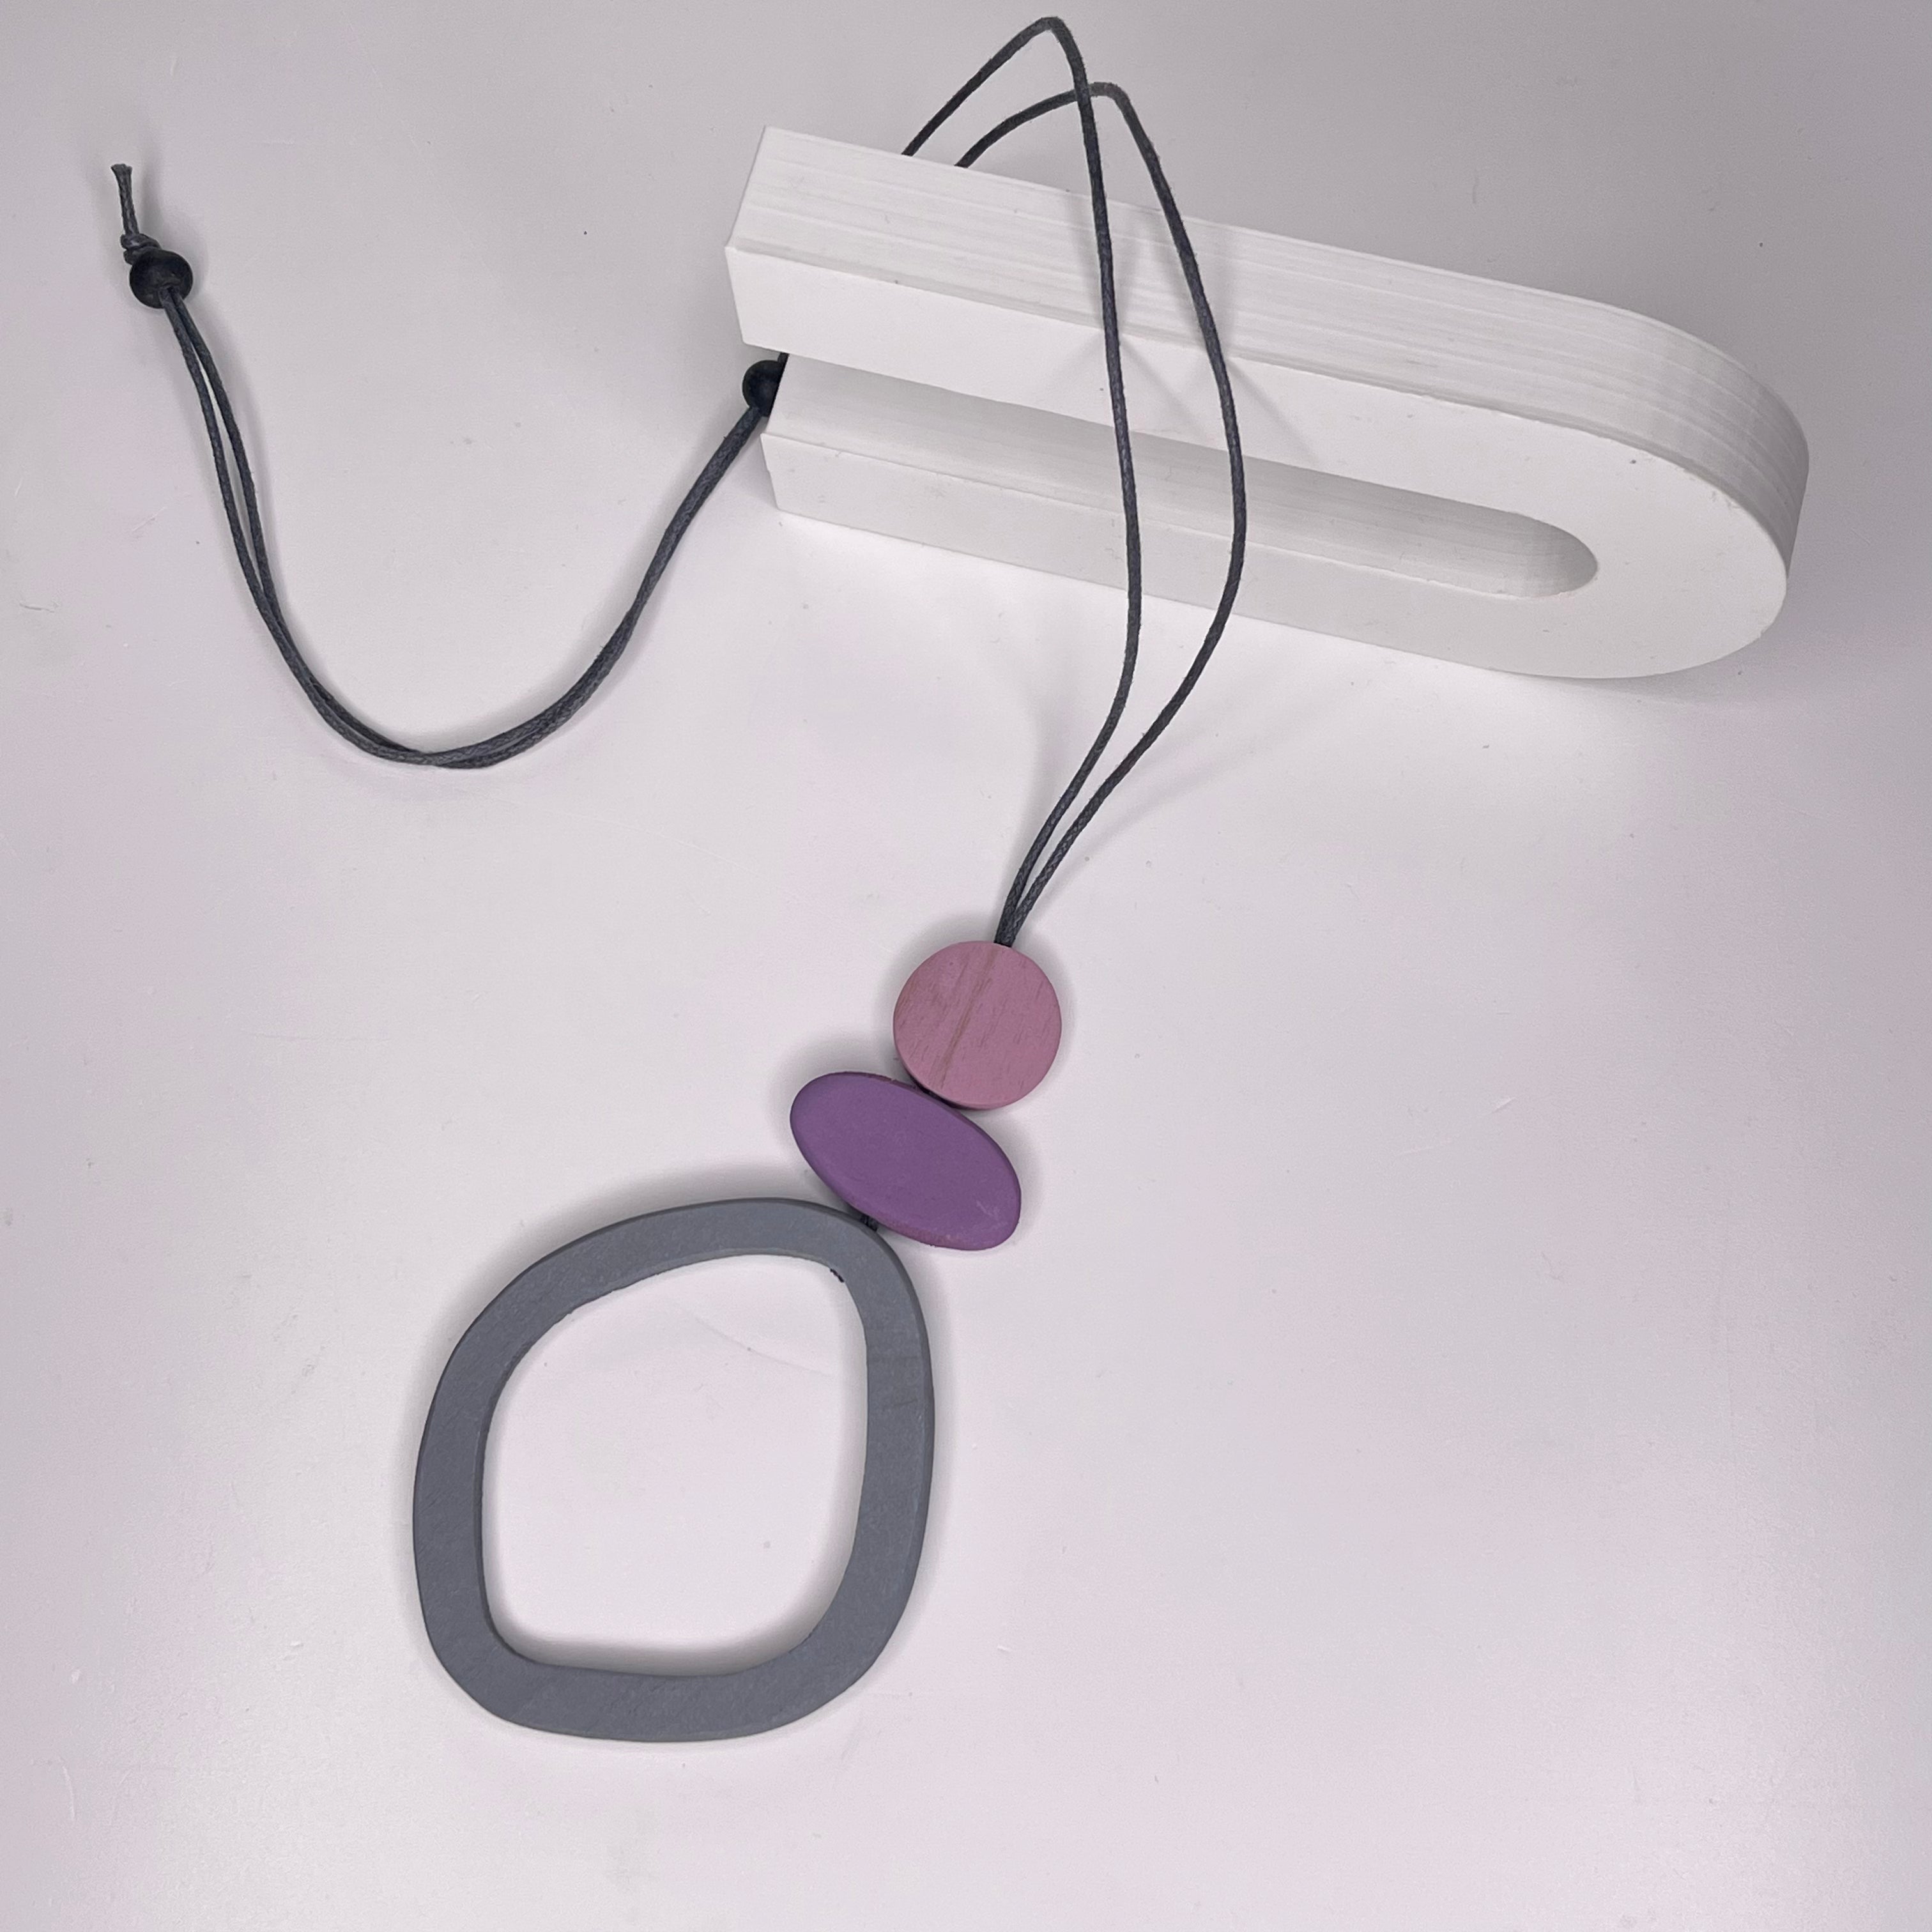 Organic wood necklace, with pink, purple and grey pendant, completely adjustable fastening